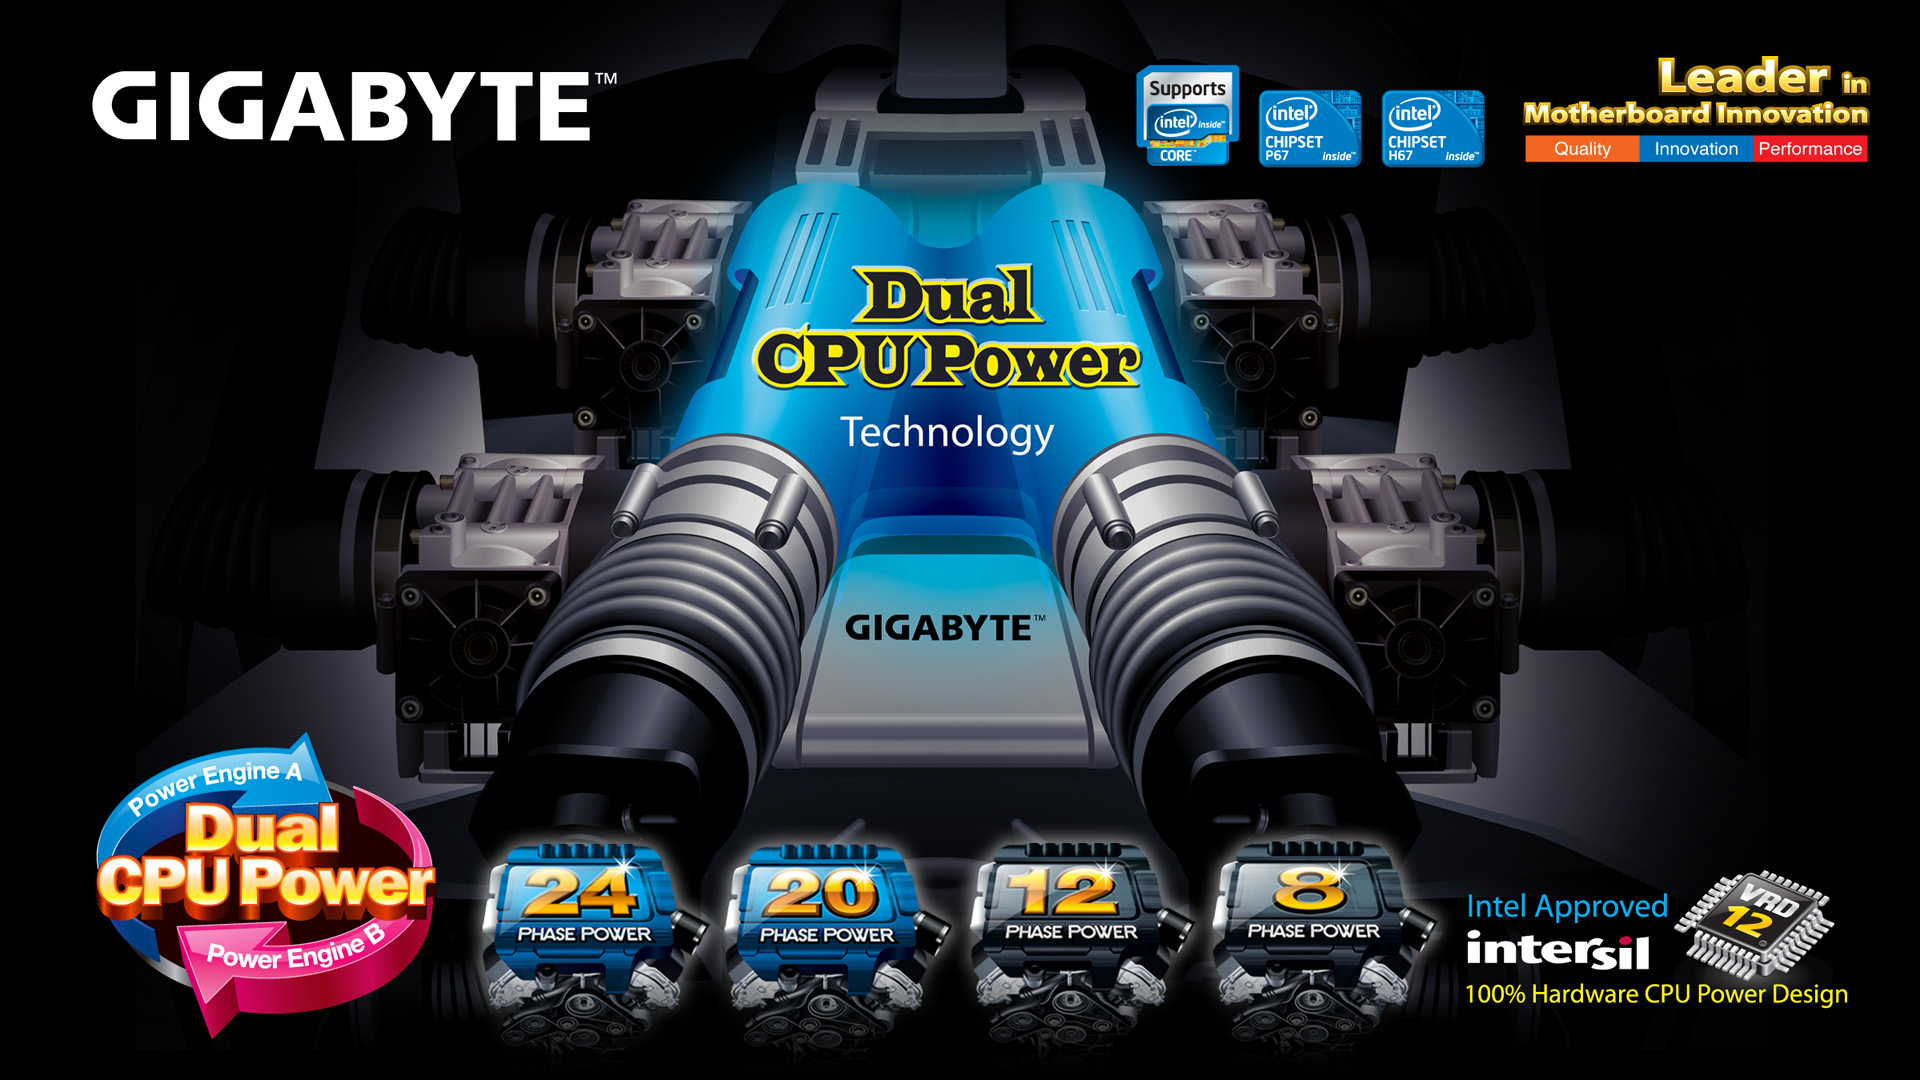 hd 598 on gigabyte ultra durable motherboard